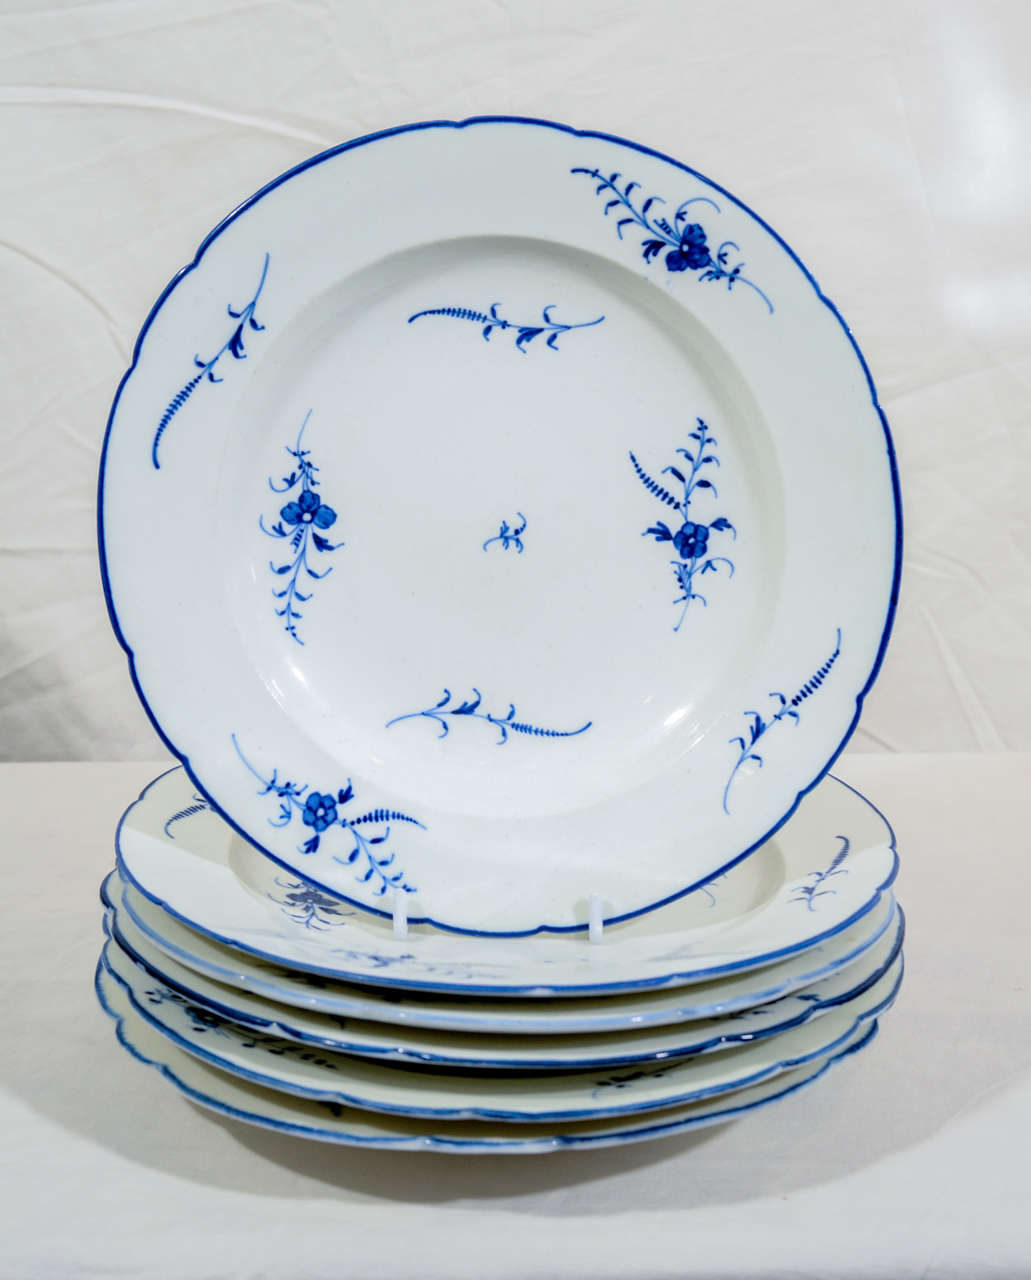 A set of 18th century Chantilly blue and white dinner plates painted with 'Chantilly Sprigs' and blue-line rims. The reverse with the Chantilly hunting horn mark in underglaze blue.
Chantilly porcelain is soft-paste porcelain produced between 1730